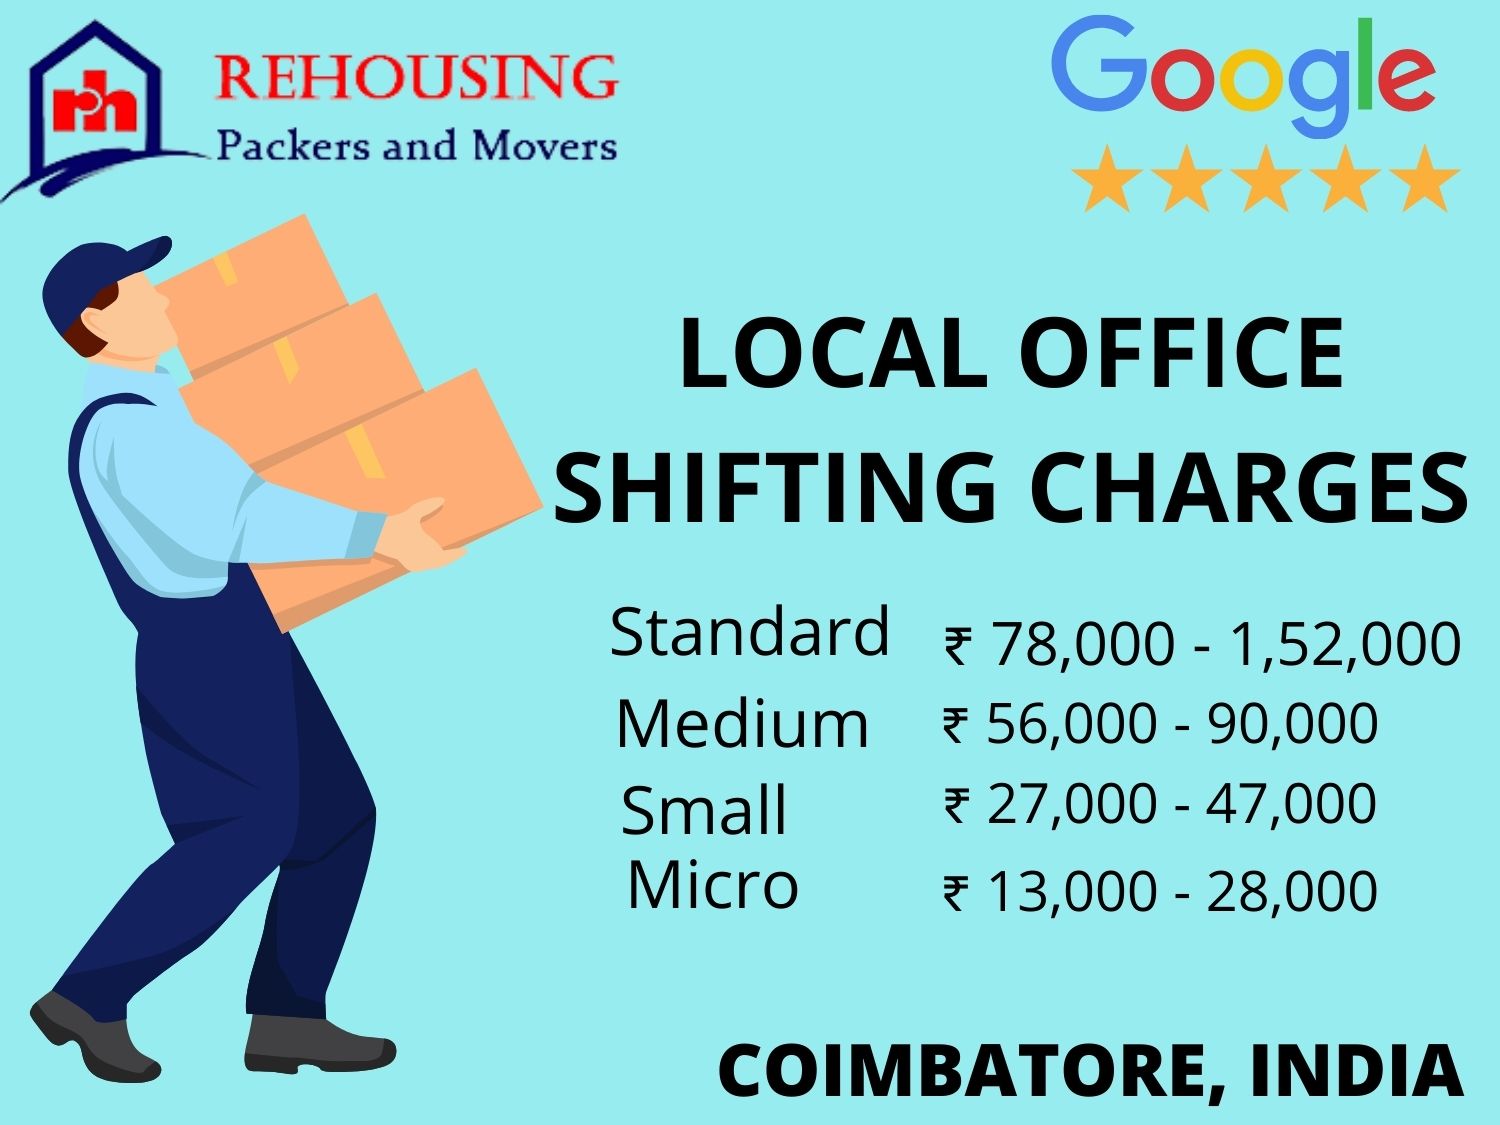 Standard office local shifting charges in Coimbatore